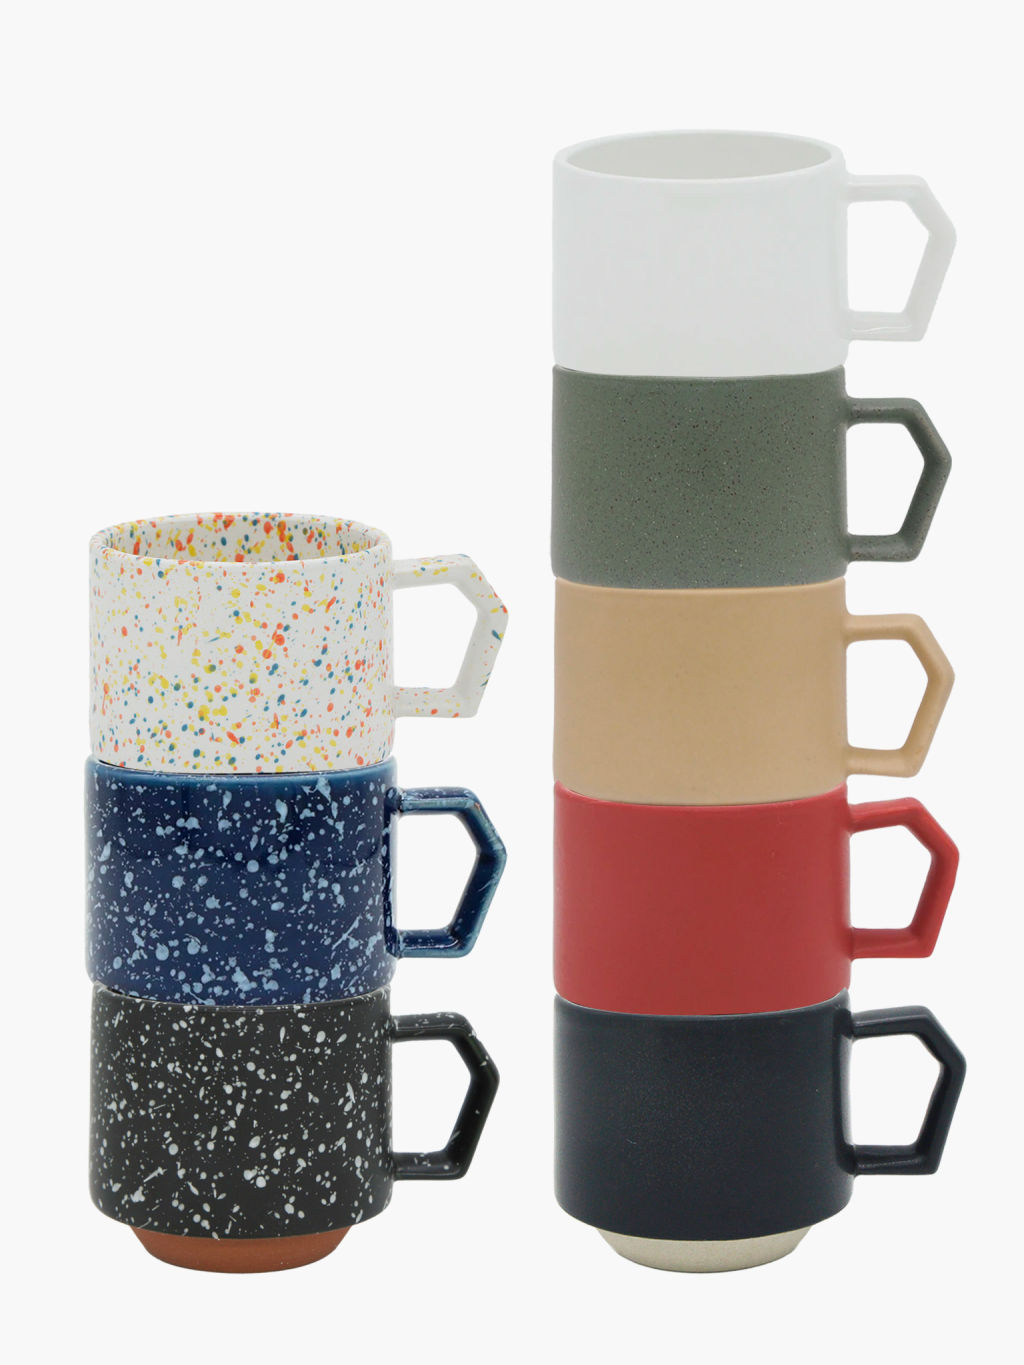 Chips Japan stack mugs are cute as well as space-saving.